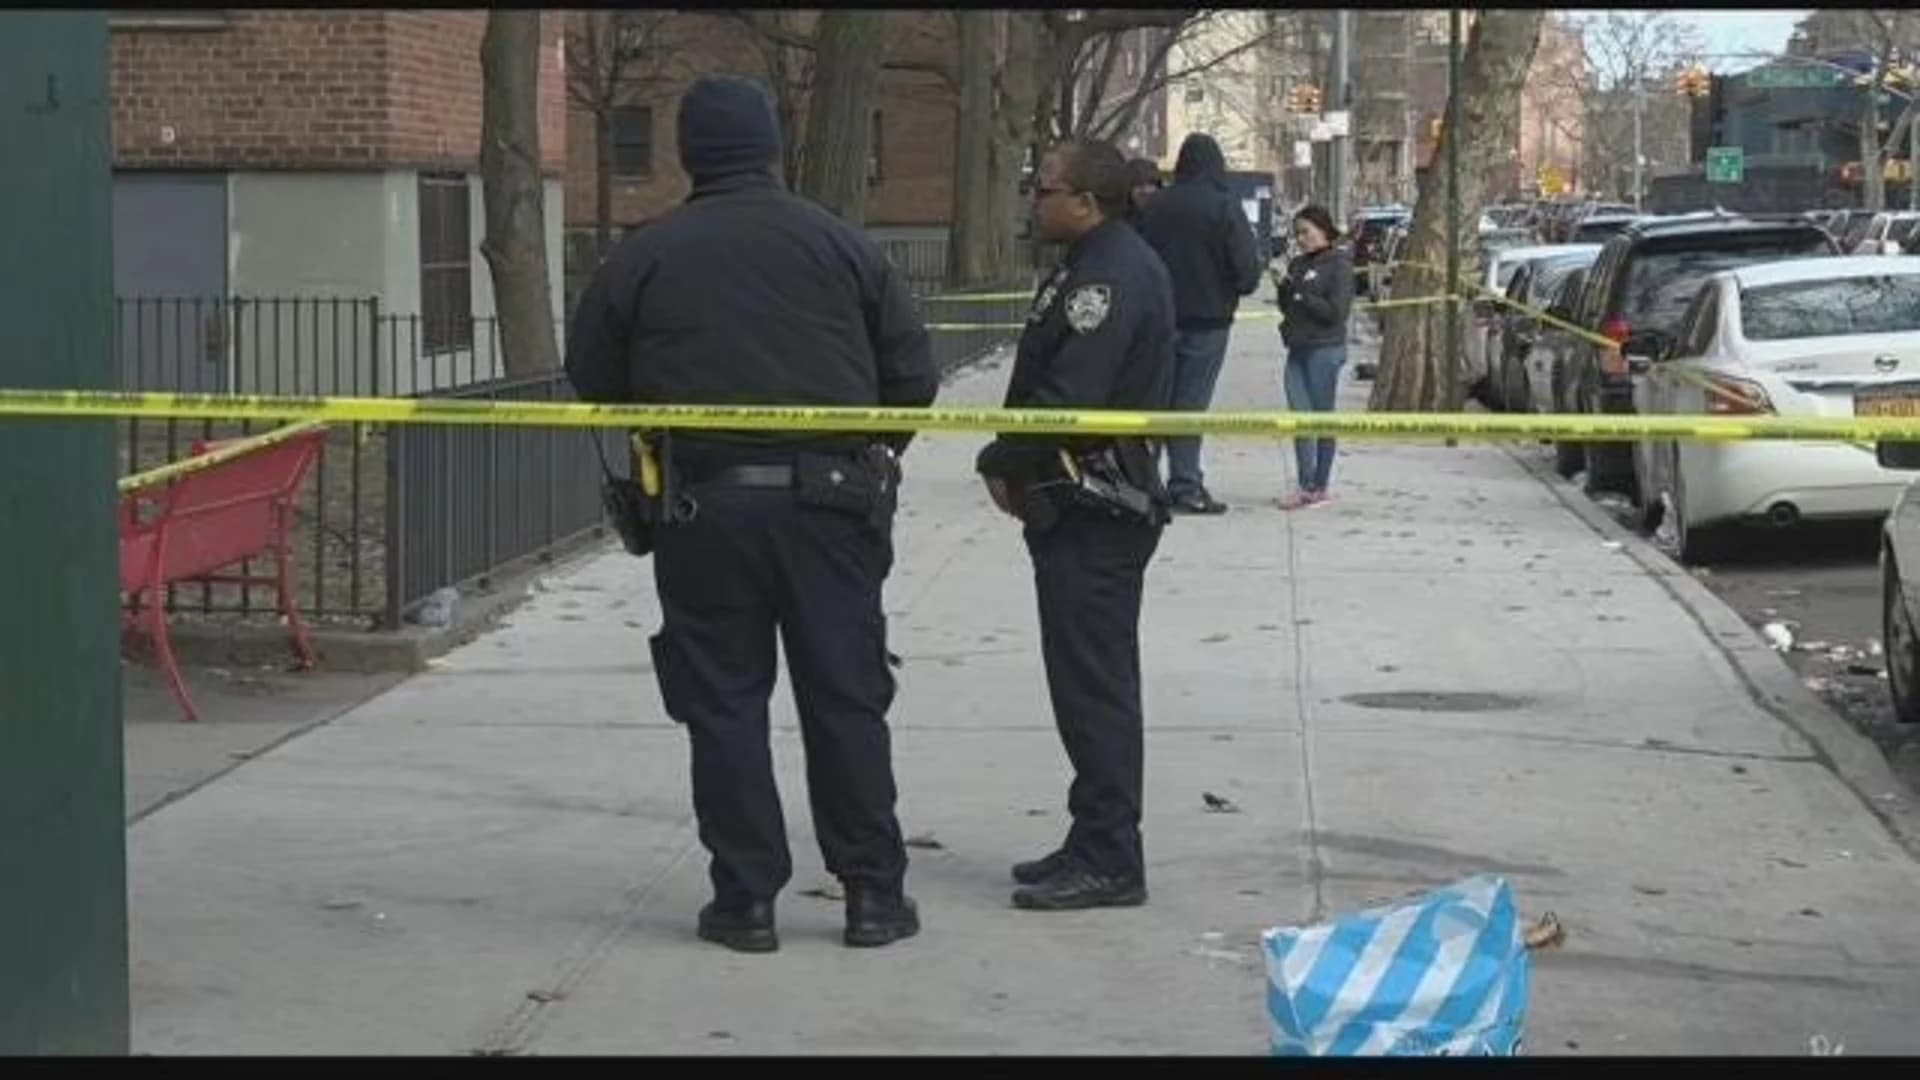 Police: 47-year-old man fatally shot at Marcy Houses